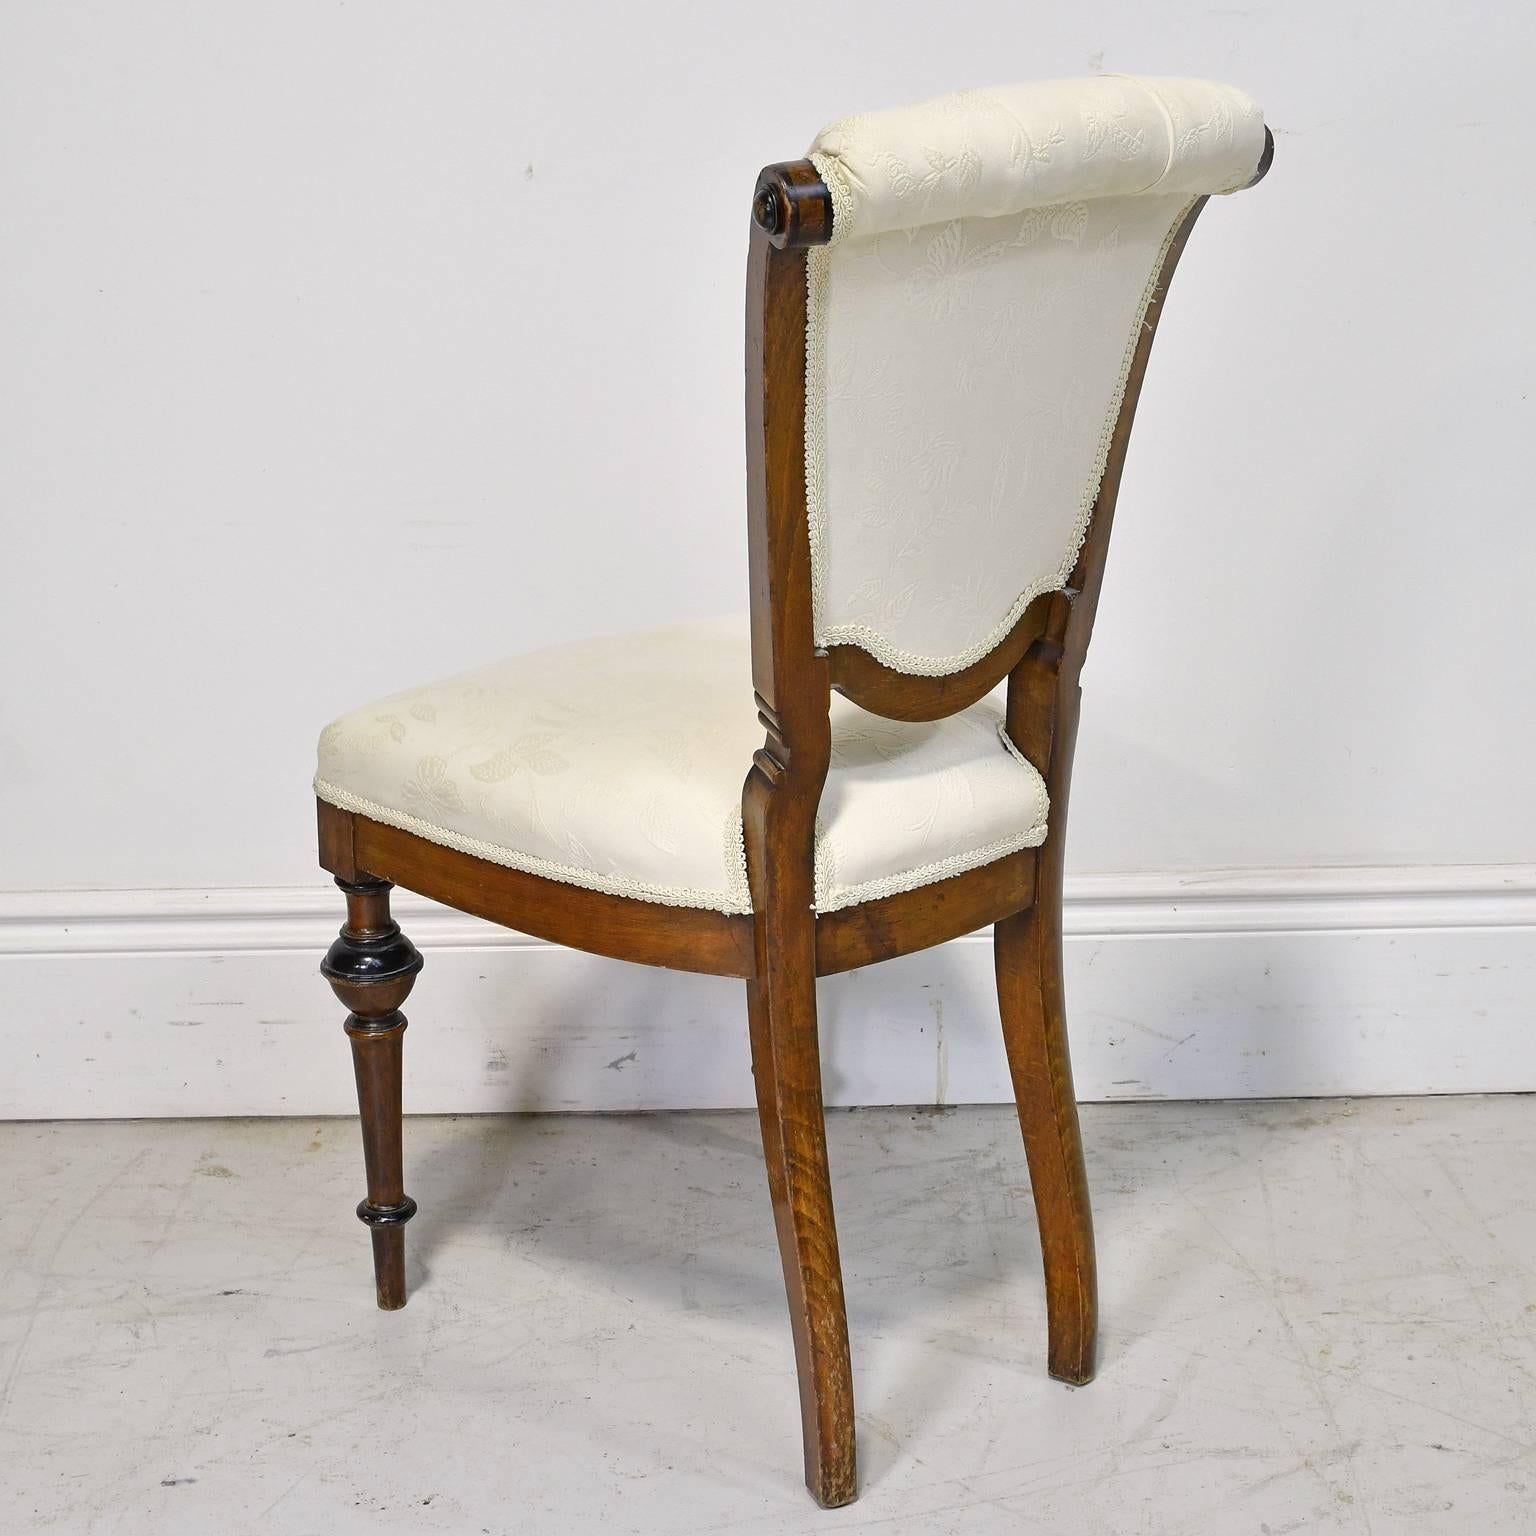 Danish 19th Century Walnut Side Chair with Ebonized Bandings, Upholstered Seat and Back